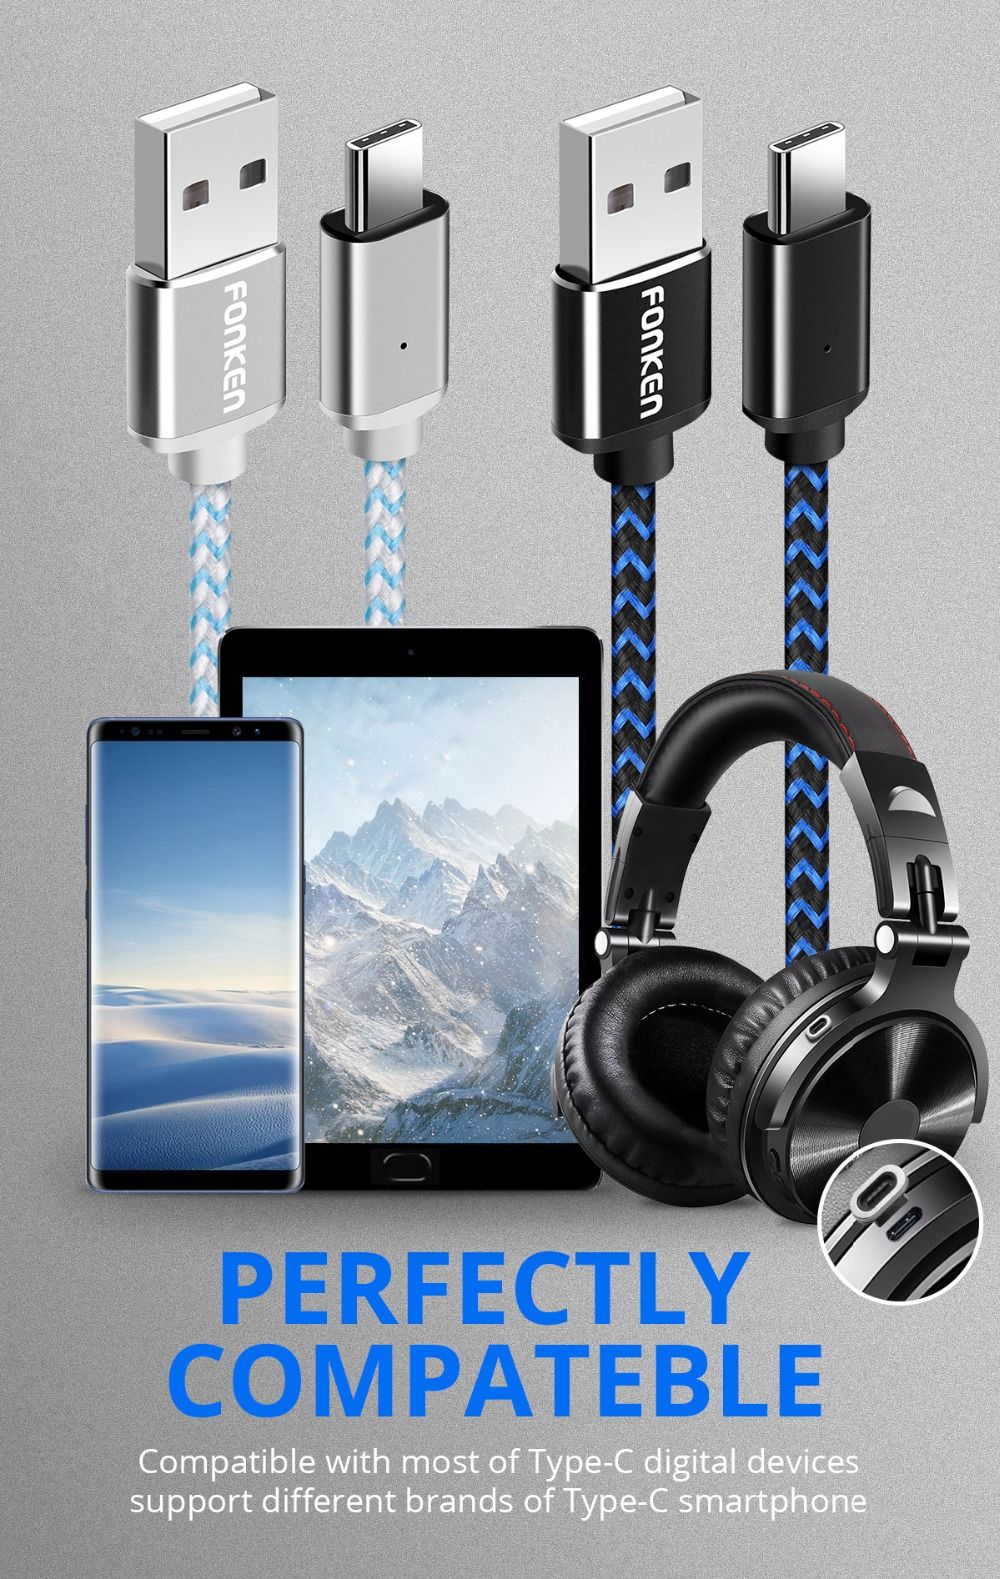 FENKON-24A-Micro-USB-Type-C-Magnetic-Nylon-Braided-Fast-Charging-Data-Cable-For-Oneplus-7-Pocophone--1534070